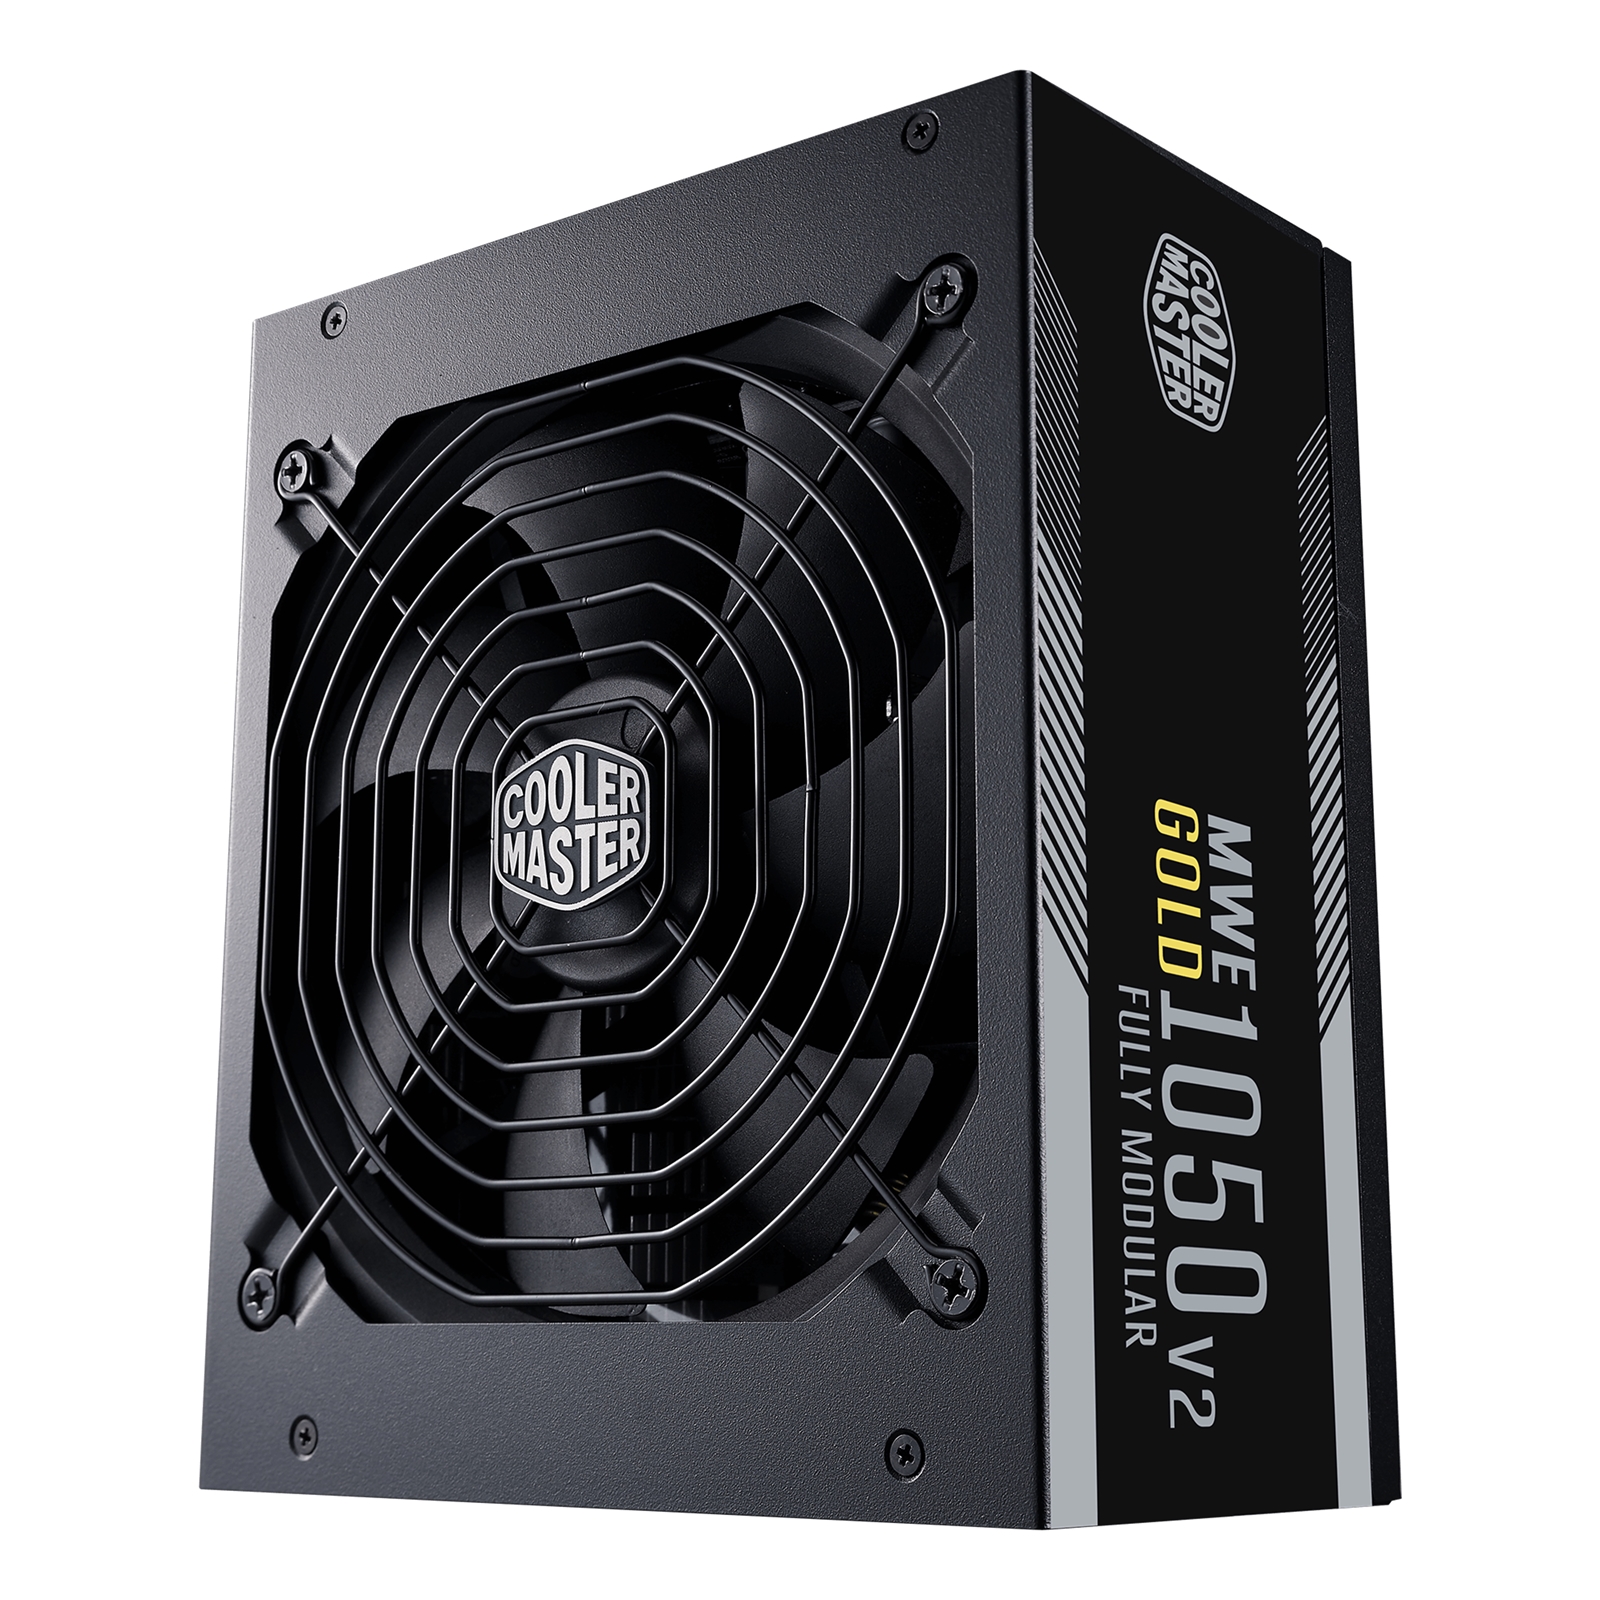 COOLER MASTER MWE Gold 1050 V2 1050W PSU, 140mm Silent Fan with Smart Temperature Controlling Feature, 80 PLUS Gold, Fully Modular, UK Plug, Flat Black Cables, RTX Ready